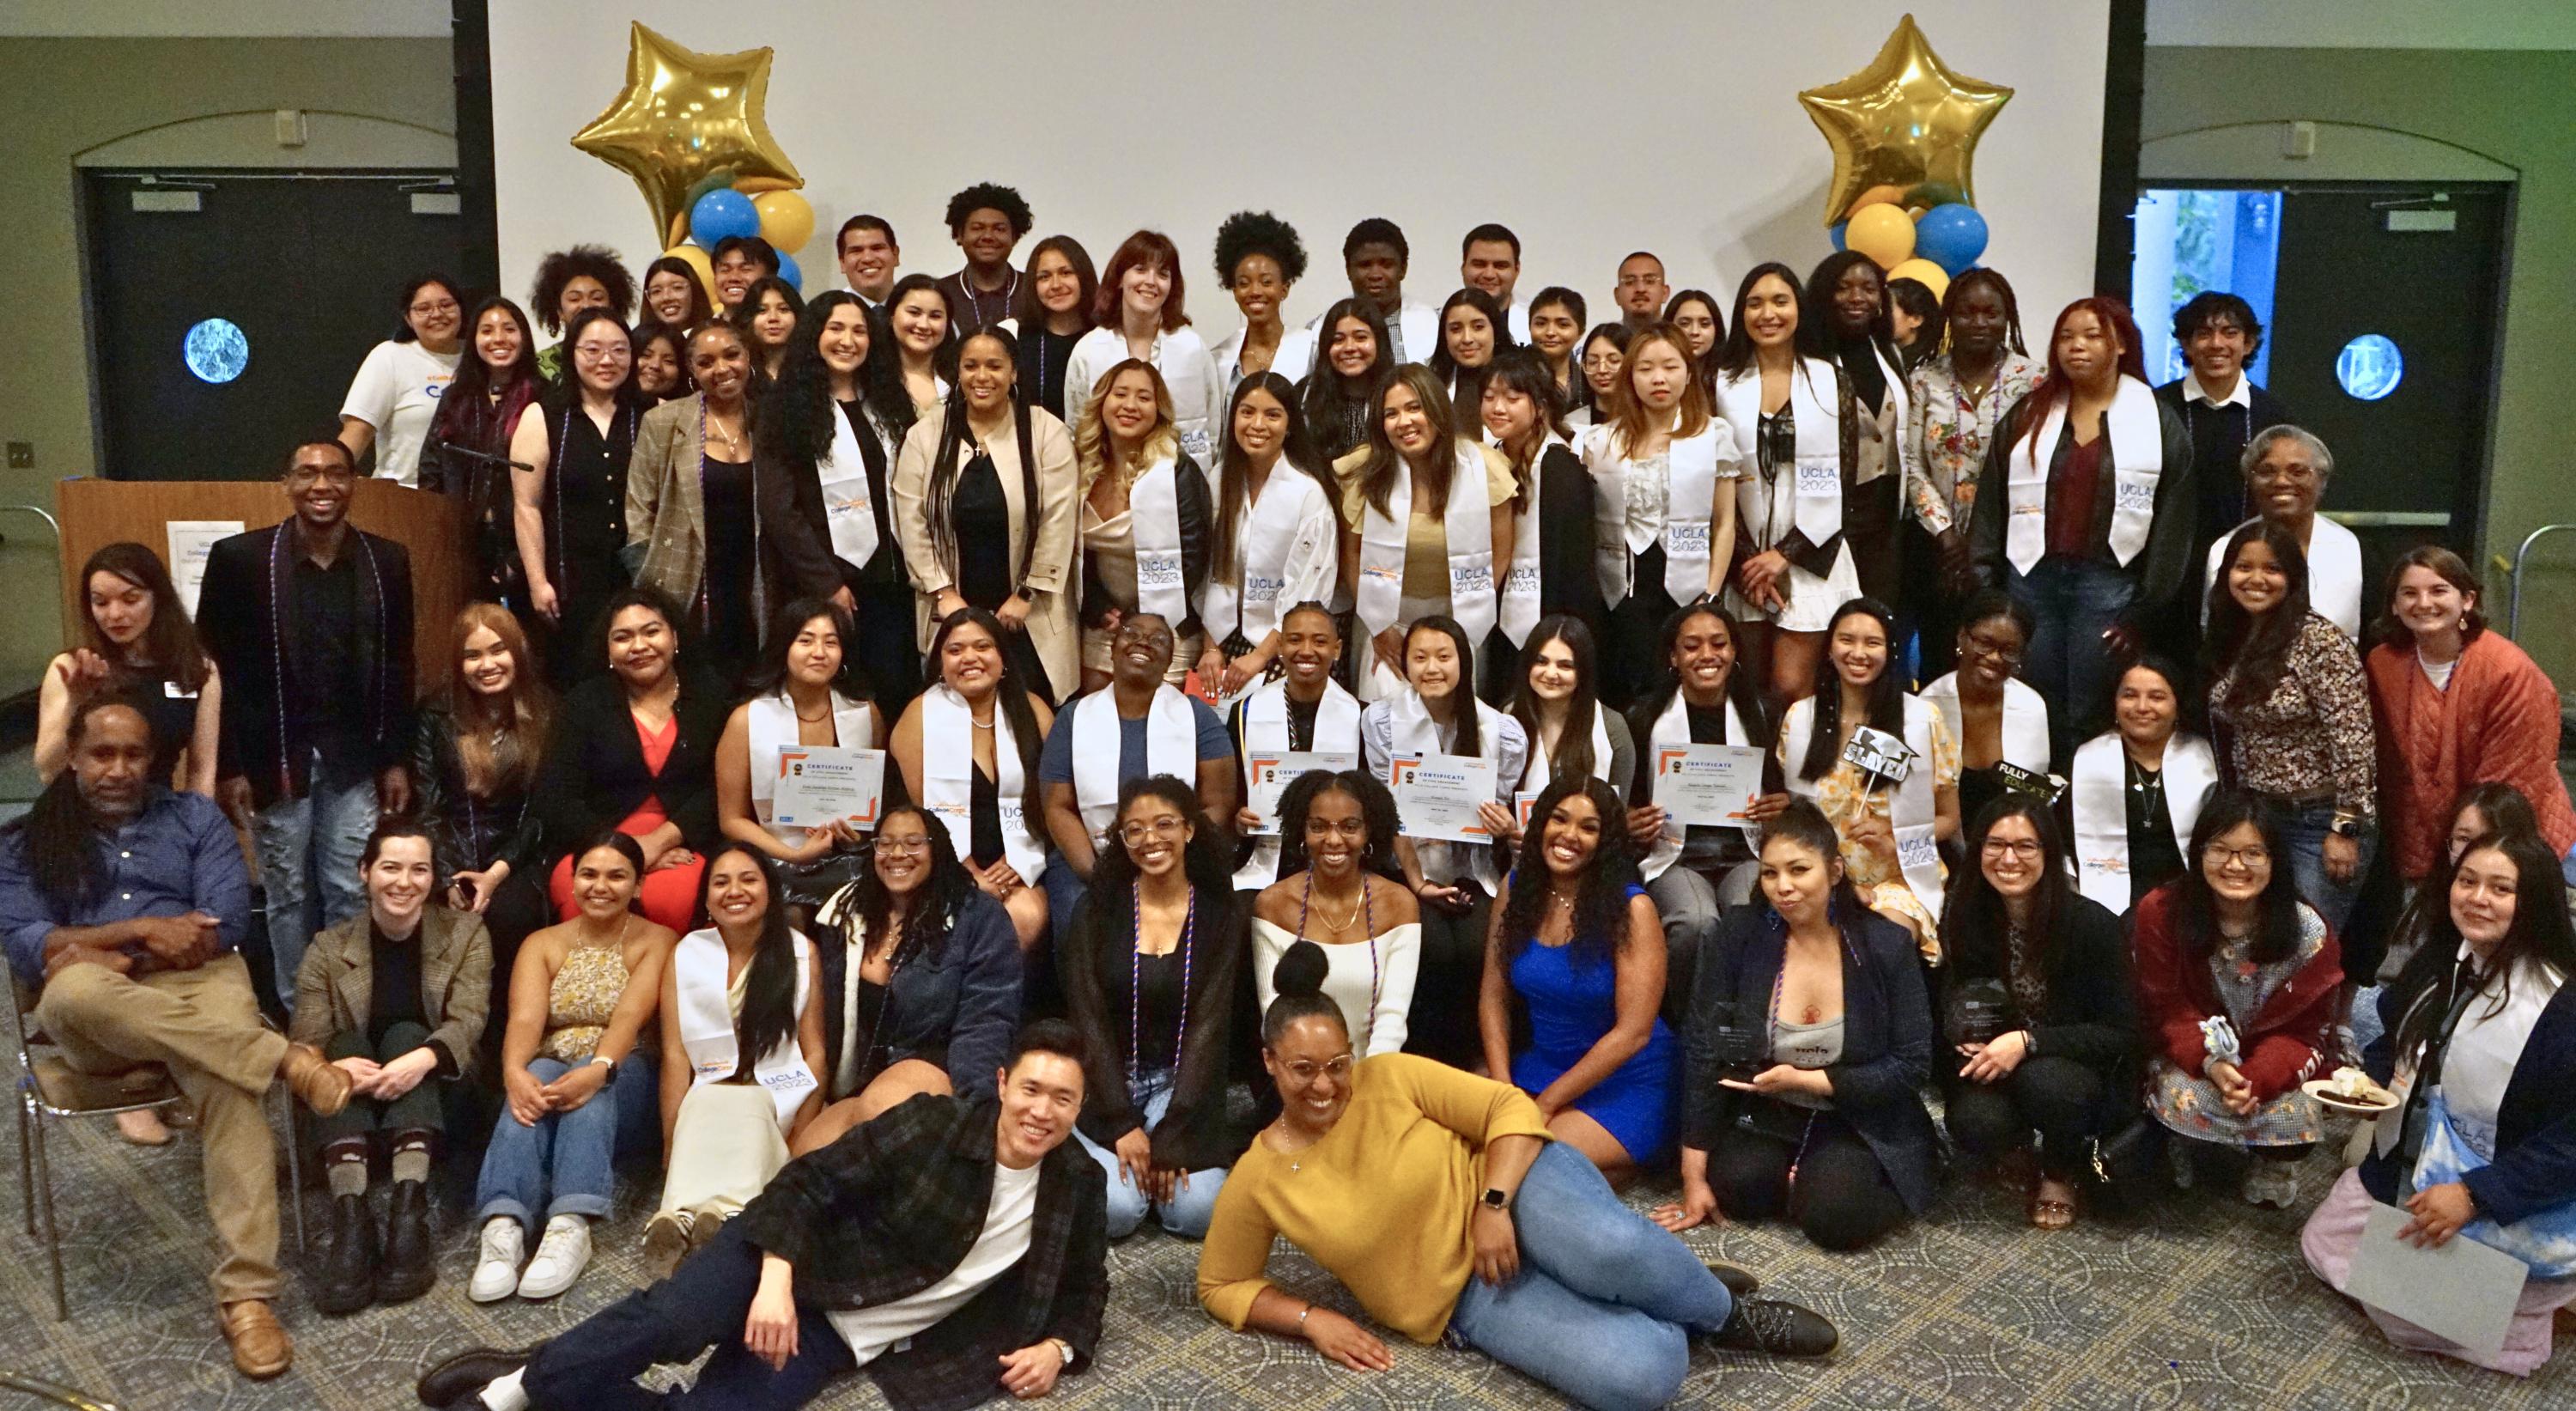 A large group of multicultural students and staff smiles for a photo in front of a large projection screen and yellow balloons shaped like stars.